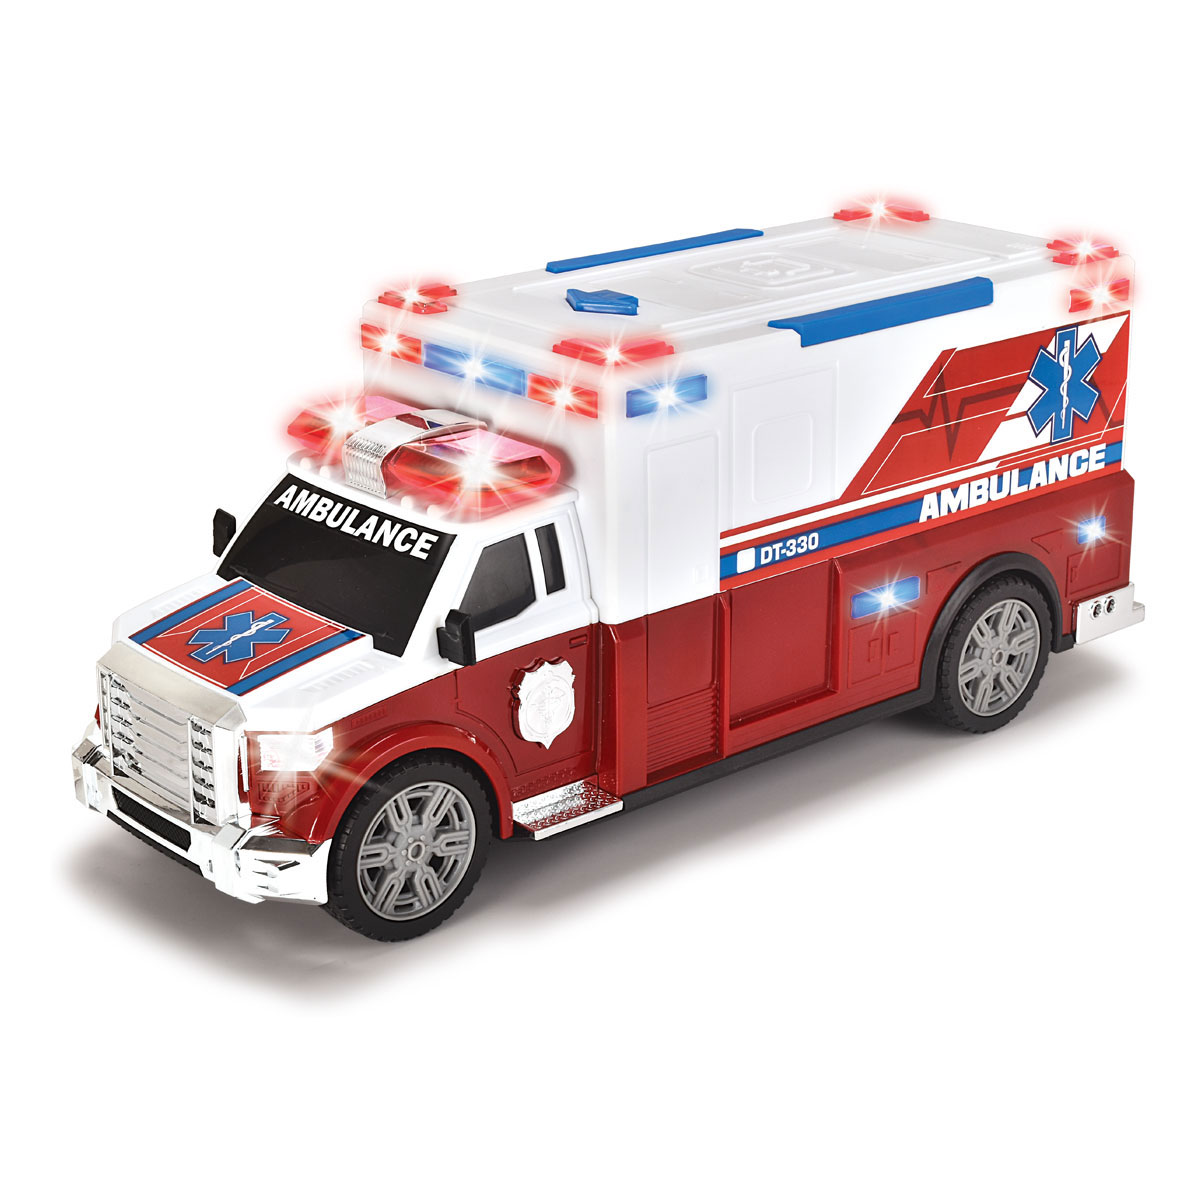 Action Ambulance 13 DICKIE TOYS 